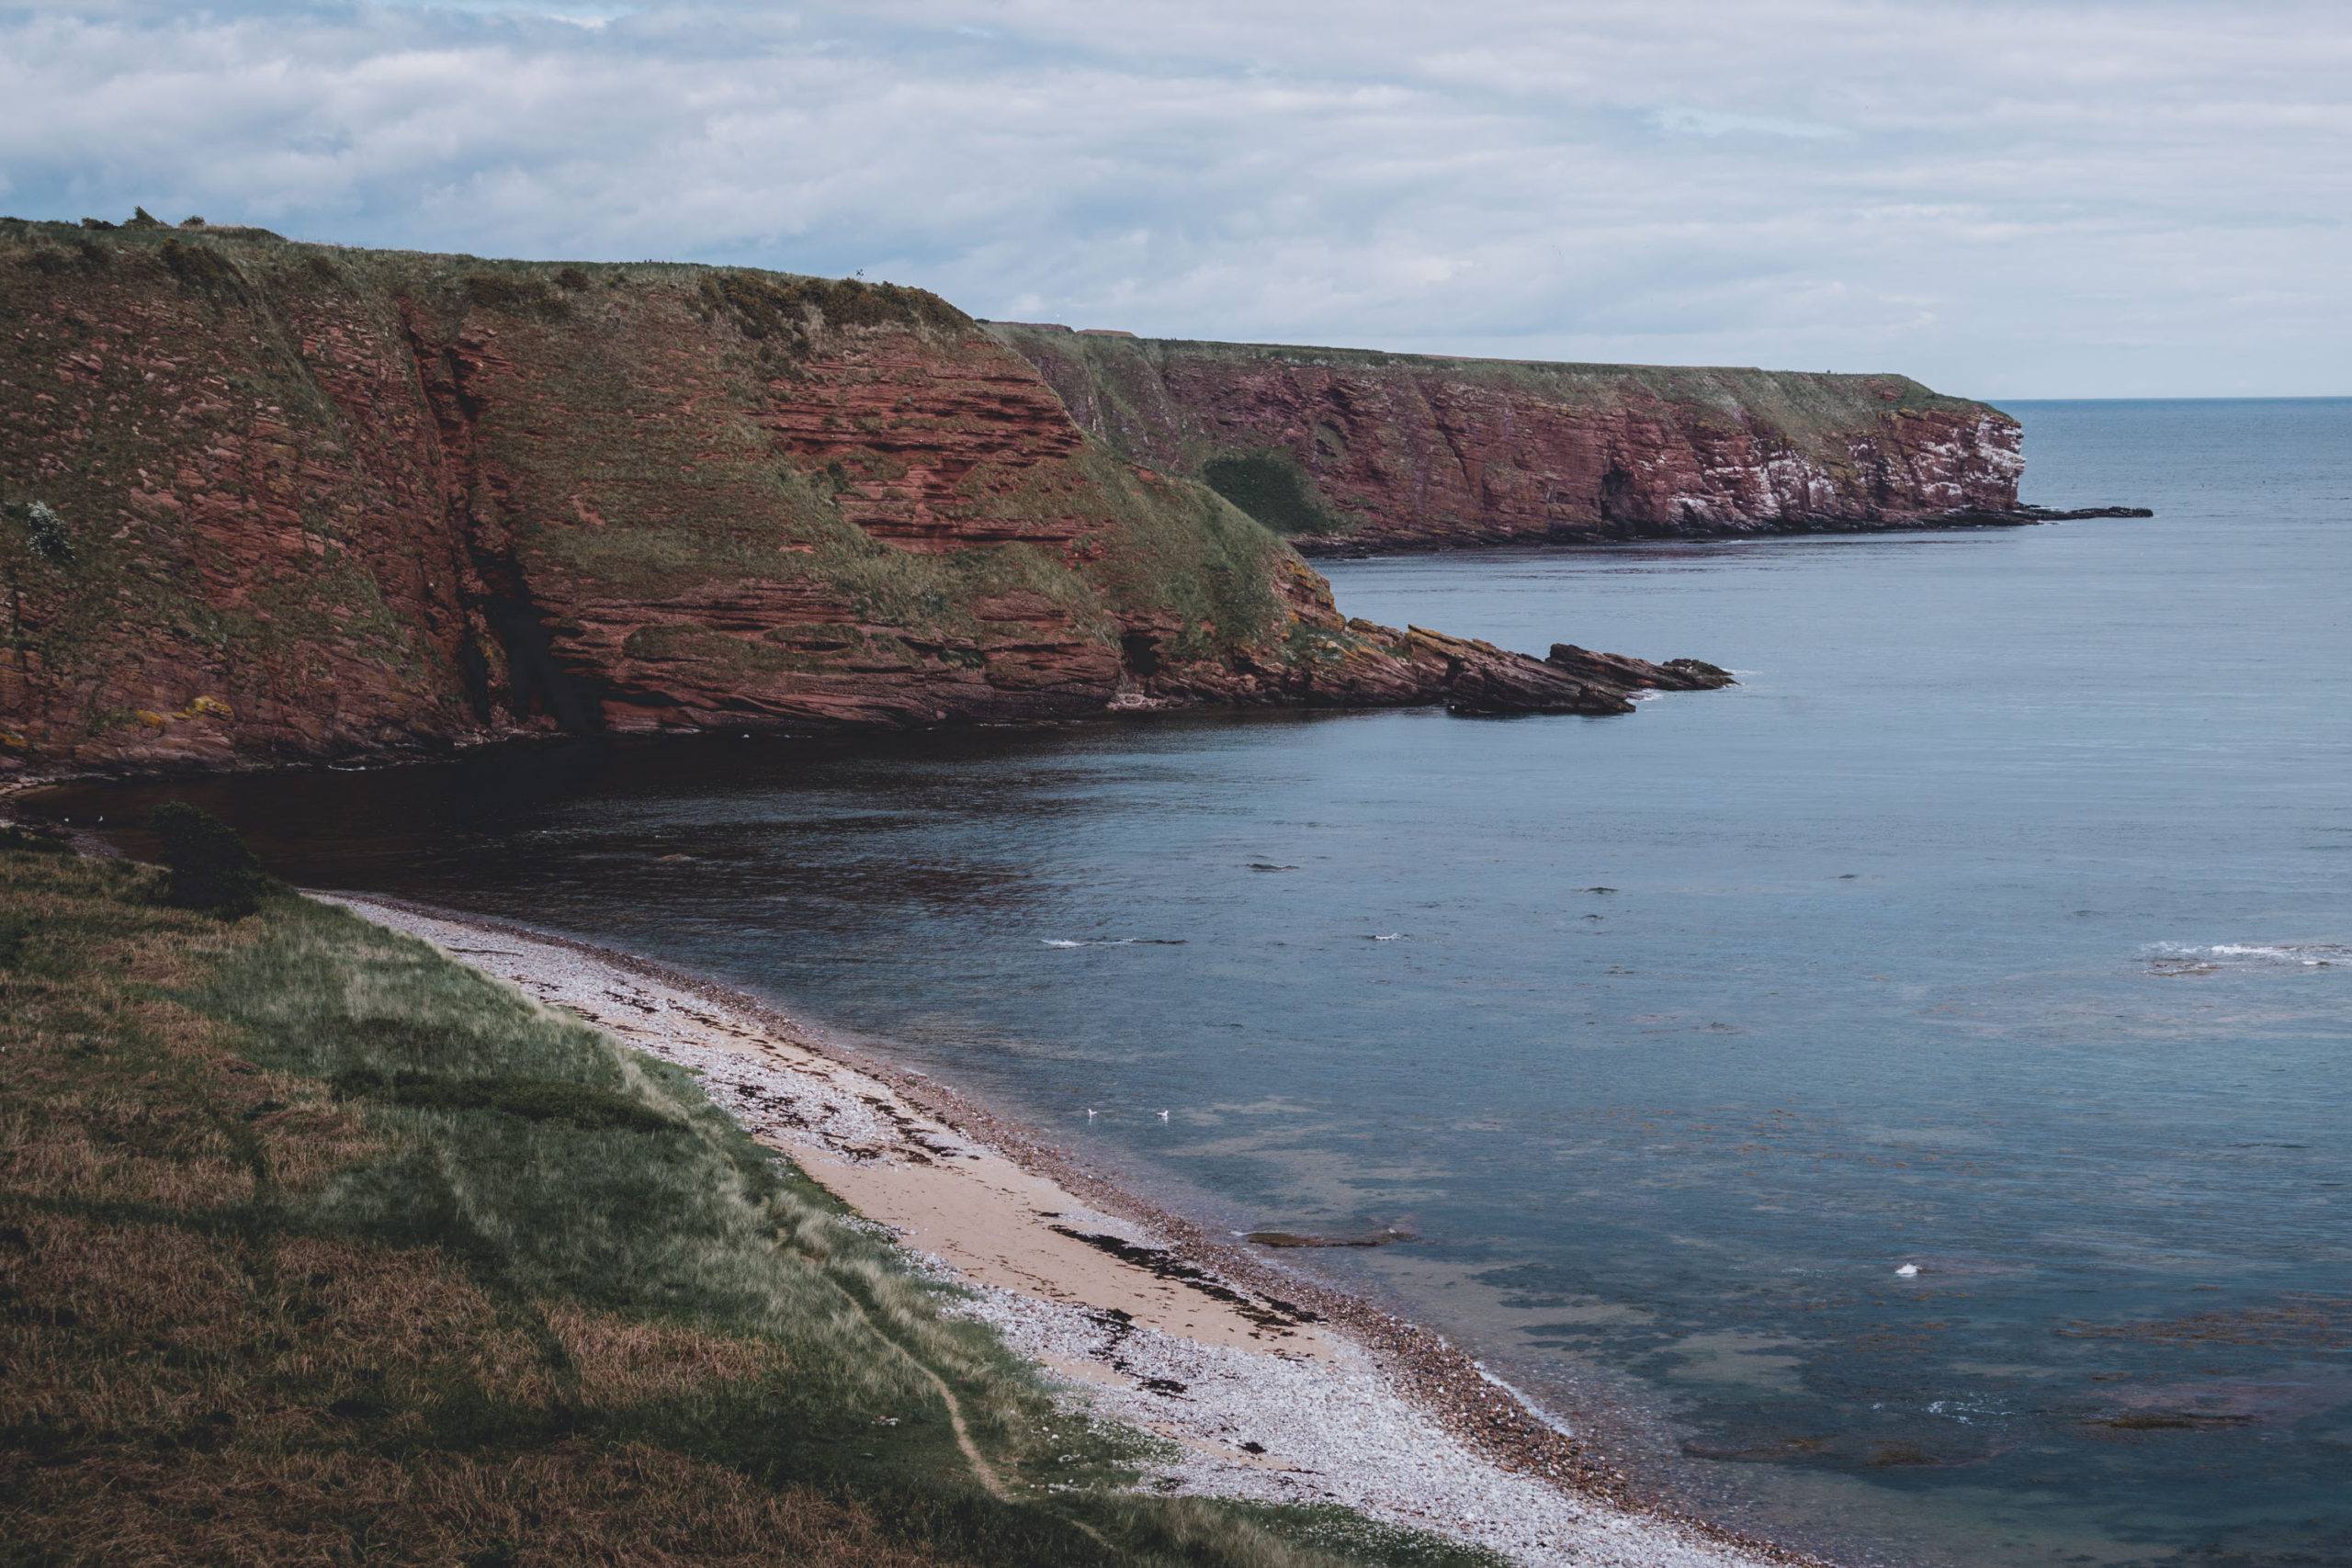 Walking The Arbroath Cliff Trail: From Auchmithie to Arbroath